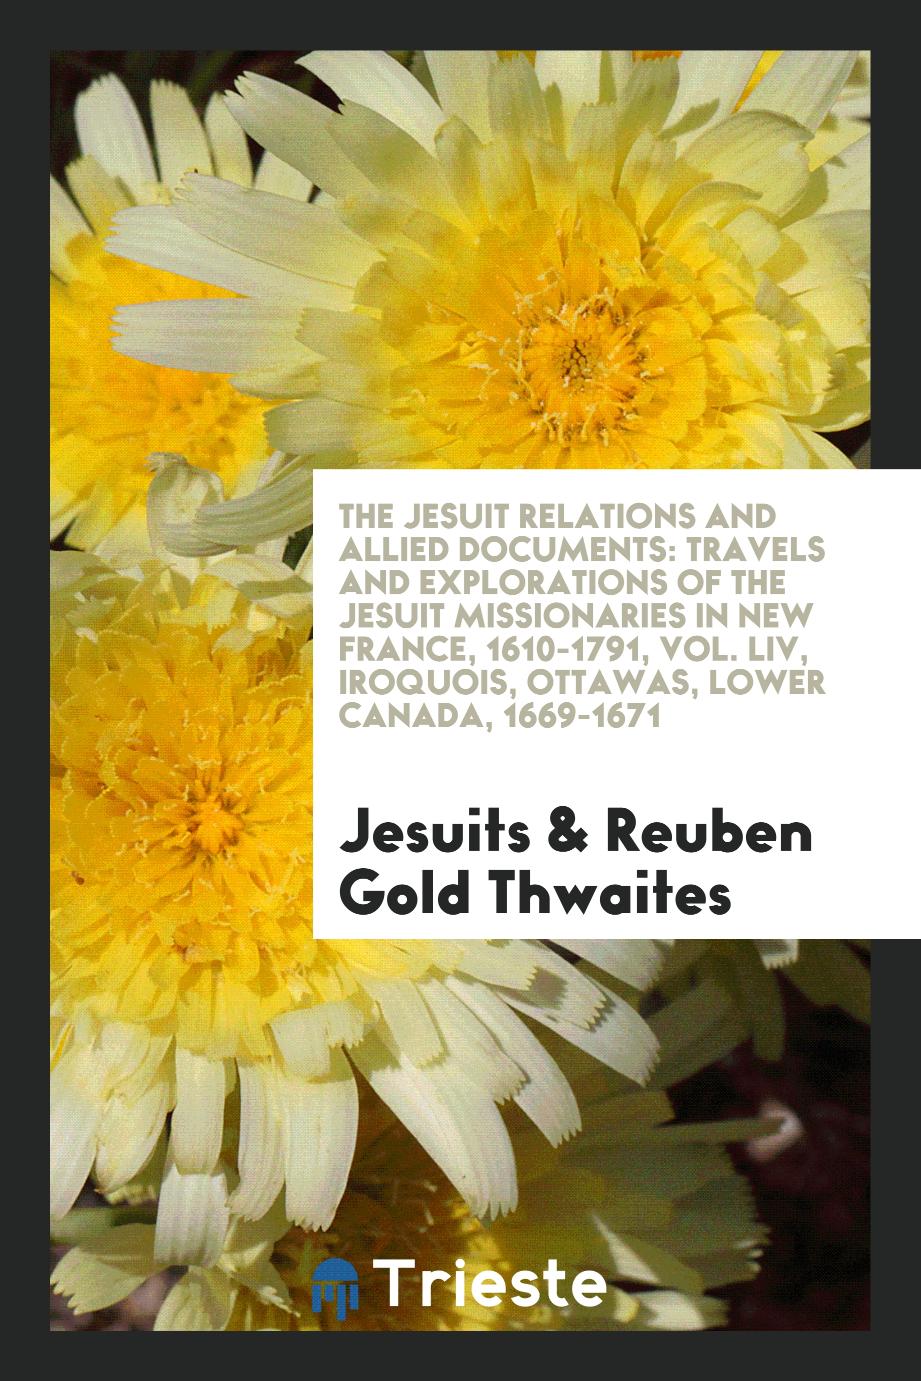 The Jesuit Relations and Allied Documents: Travels and Explorations of the Jesuit Missionaries in New France, 1610-1791, Vol. LIV, Iroquois, Ottawas, Lower Canada, 1669-1671